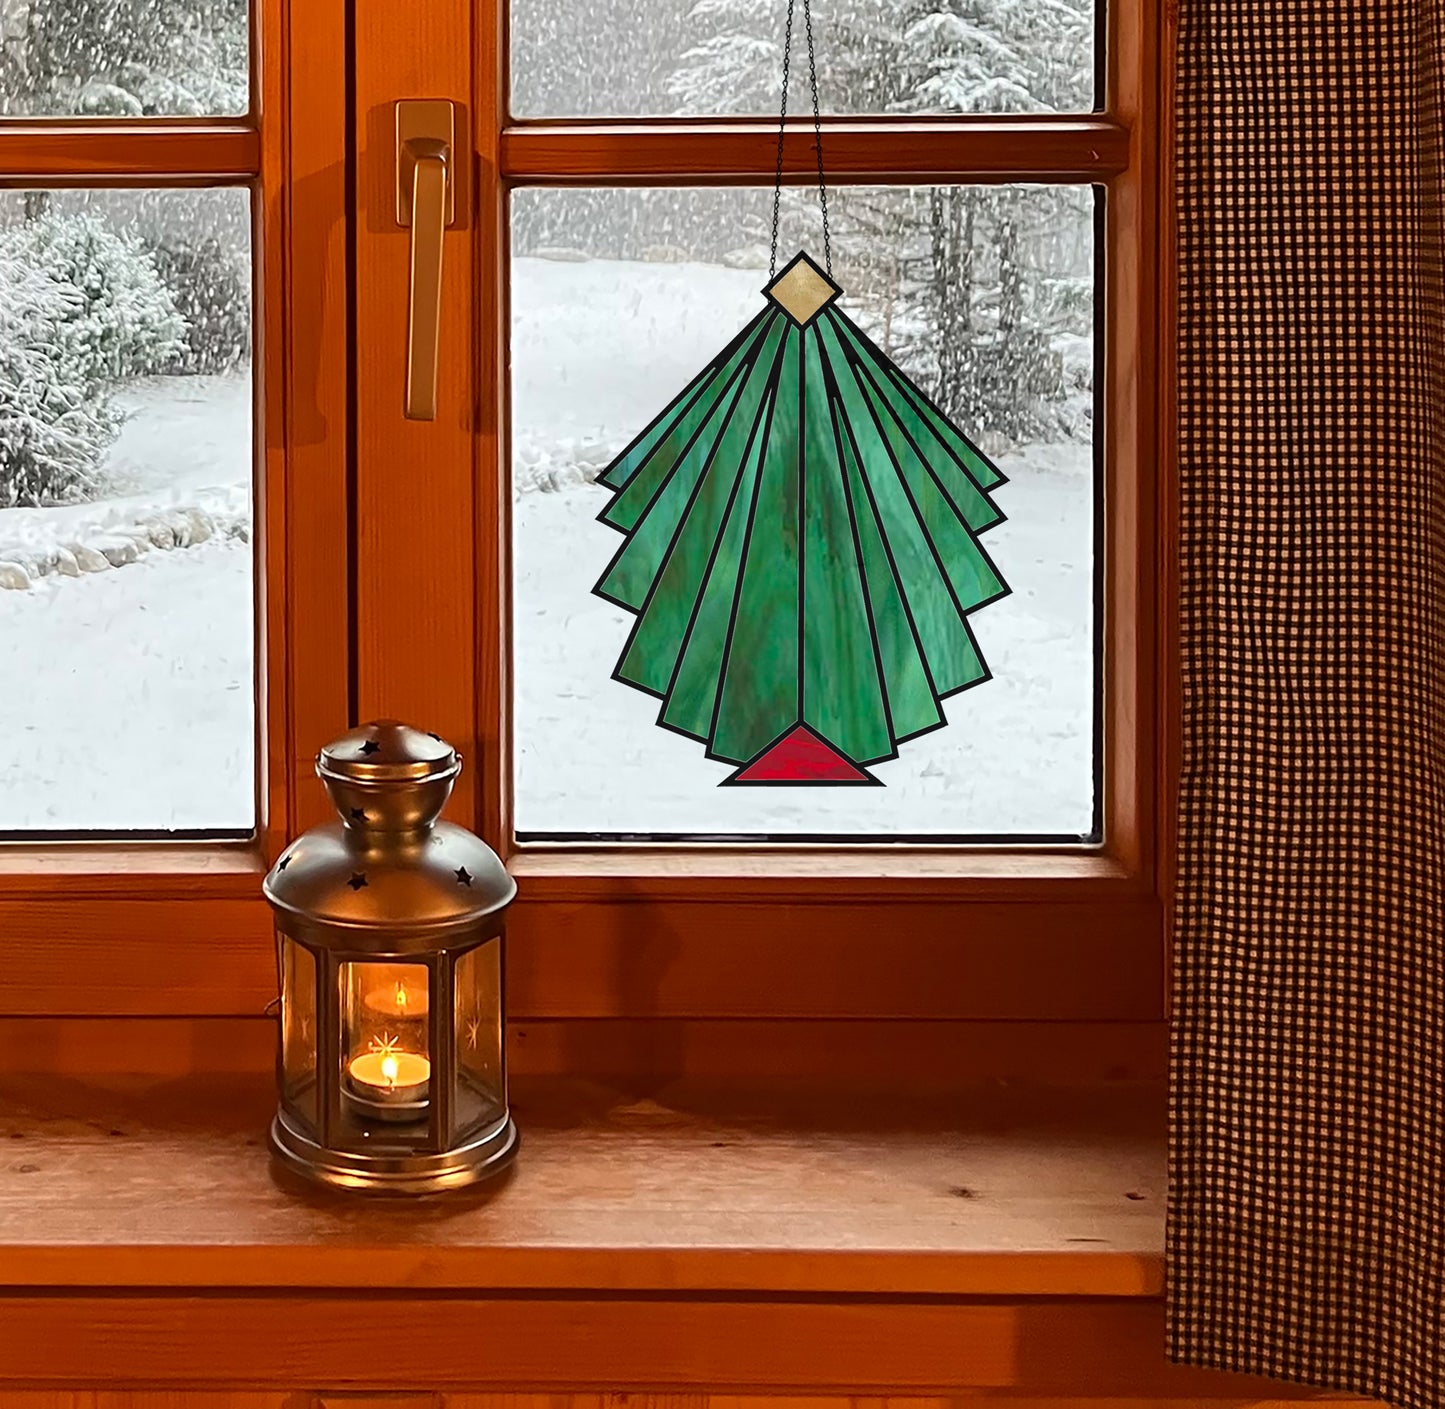 Beginner Art Deco Christmas Tree Stained Glass Pattern